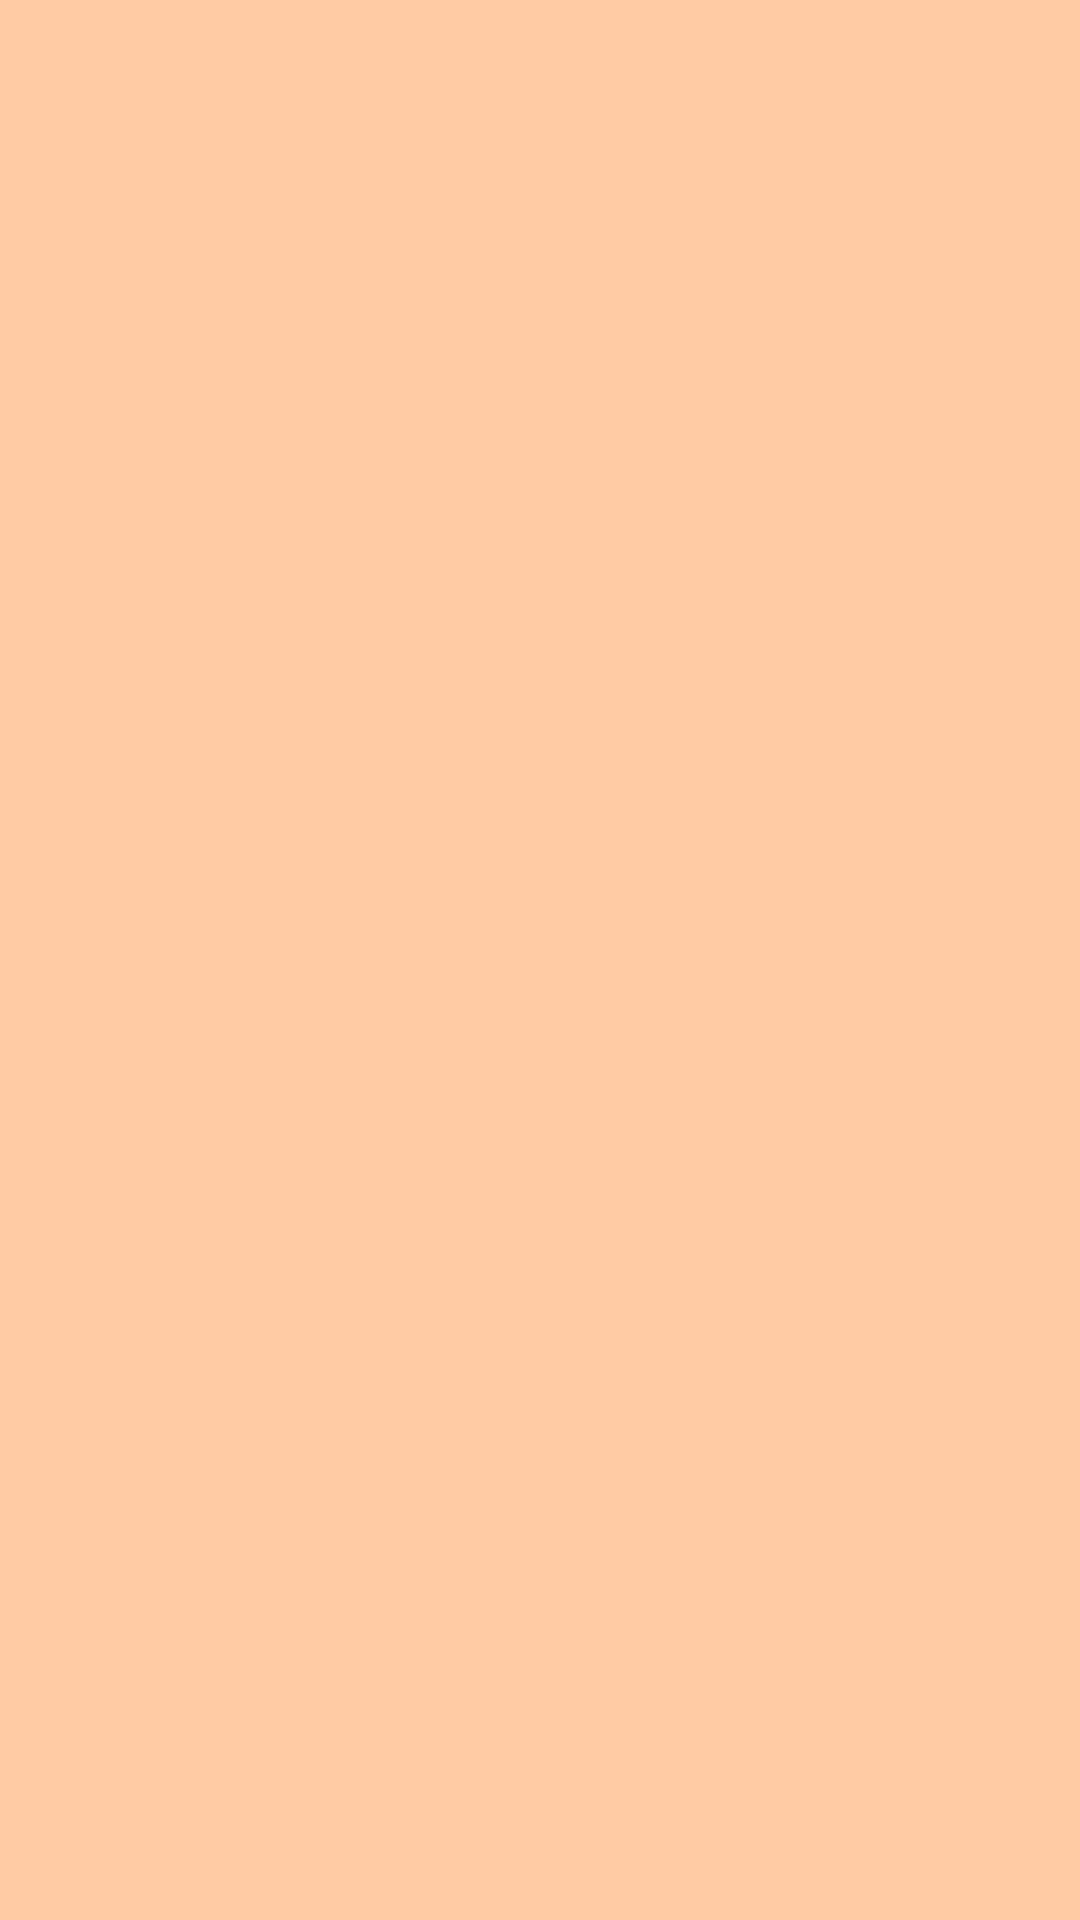 1080x1920 Deep Peach Solid Color Backgrounds